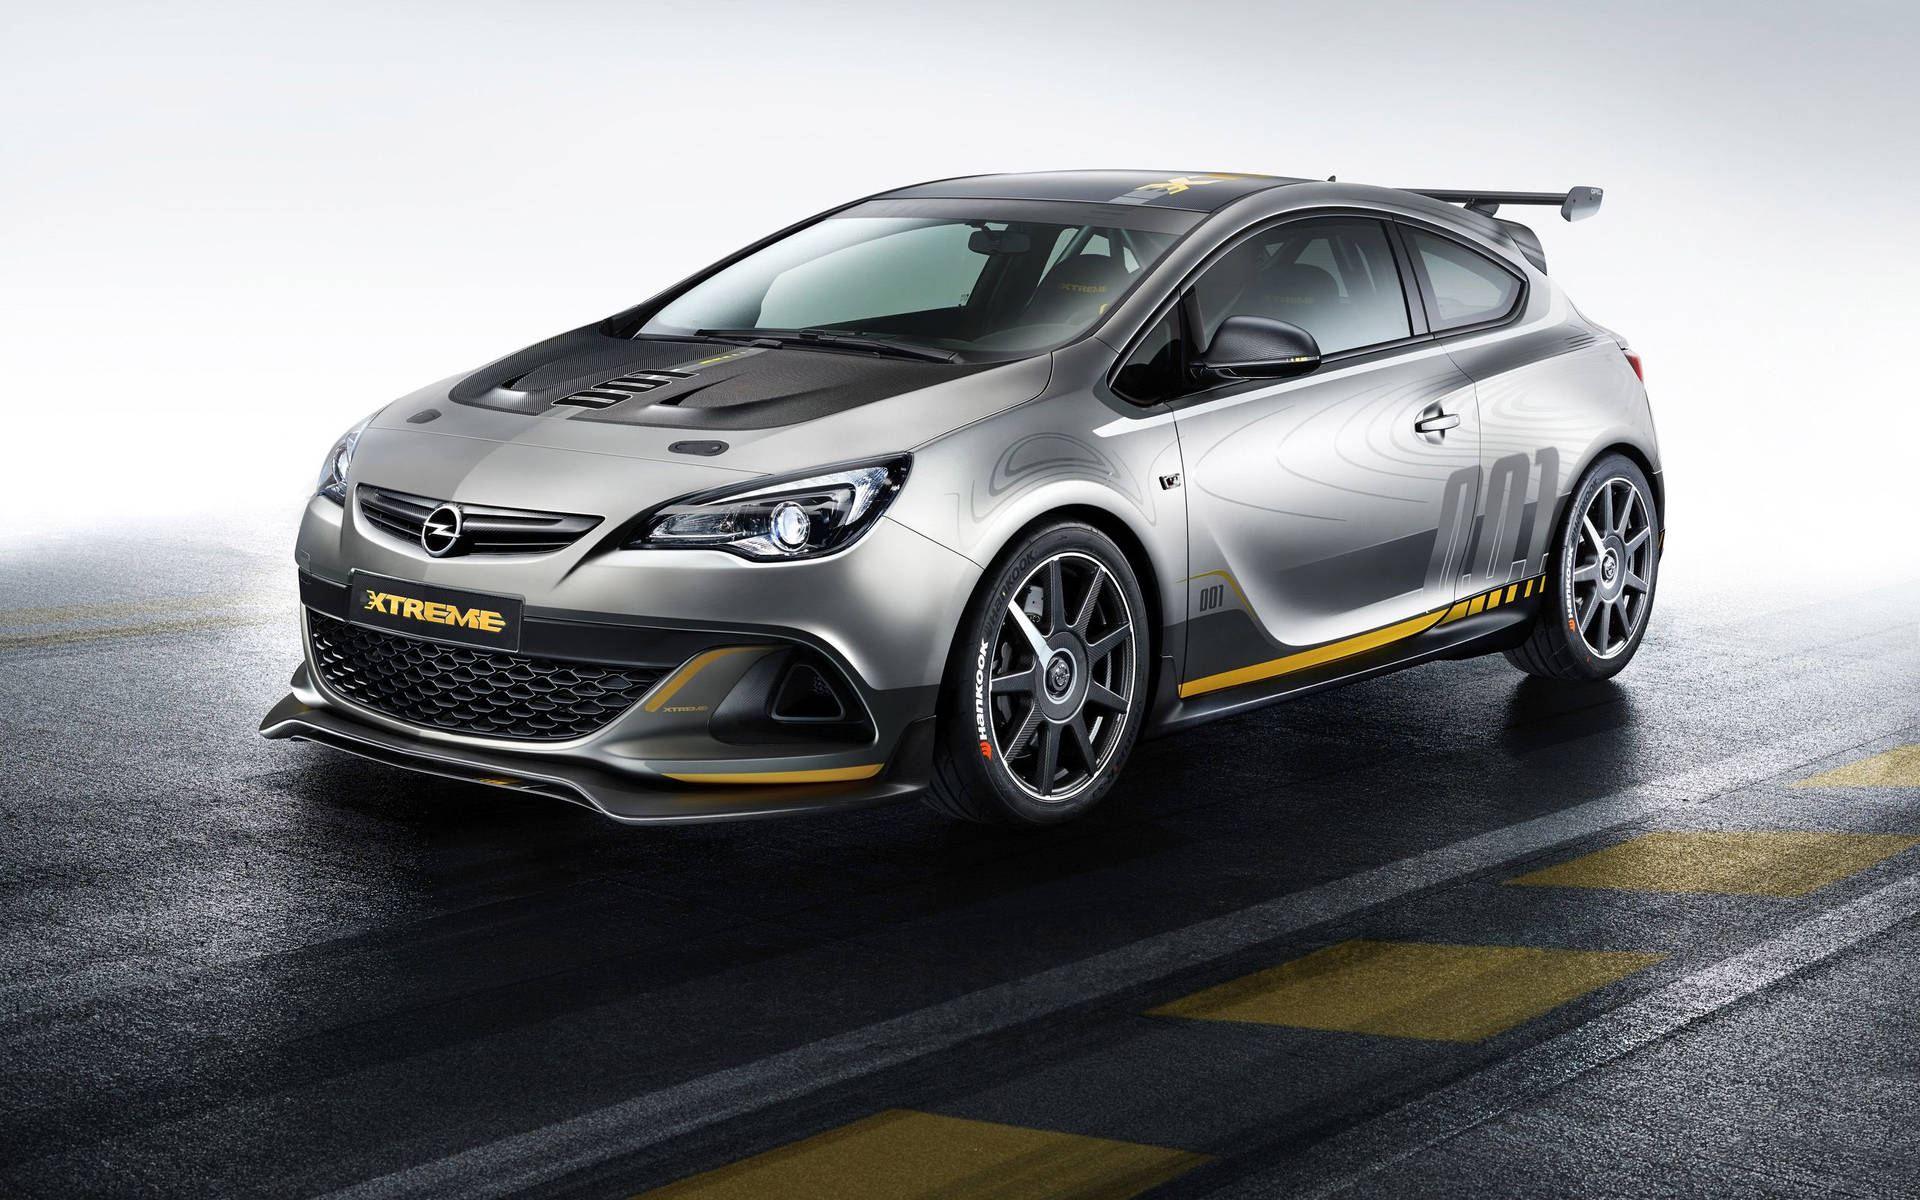 Gray Opel Astra OPC Extreme Wallpaper